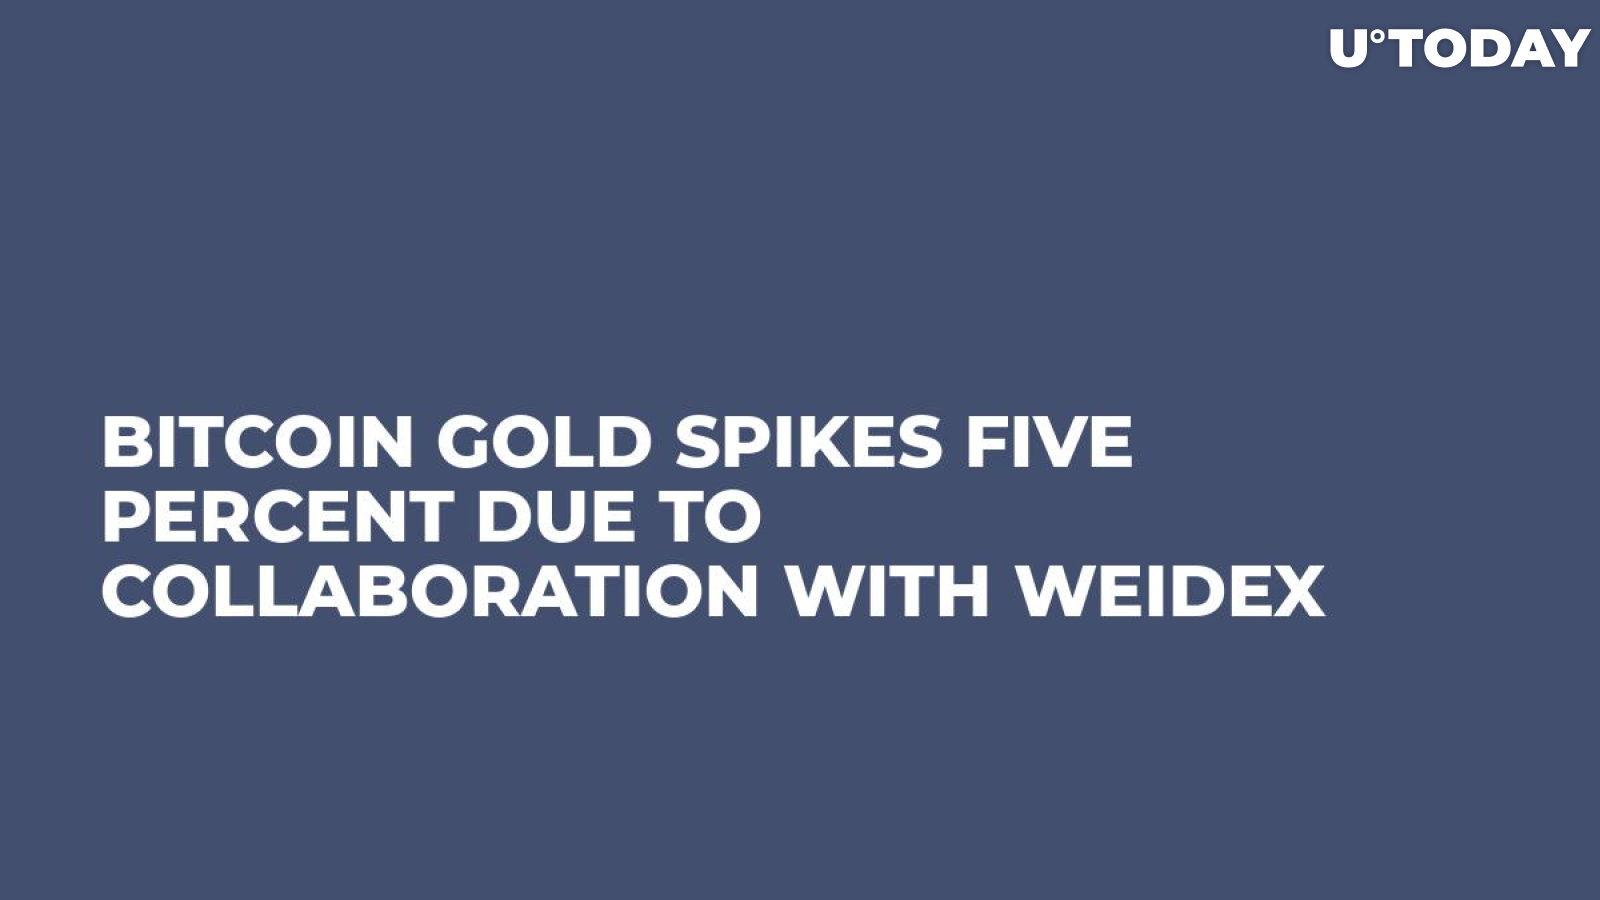 Bitcoin Gold Spikes Five Percent Due to Collaboration With Weidex